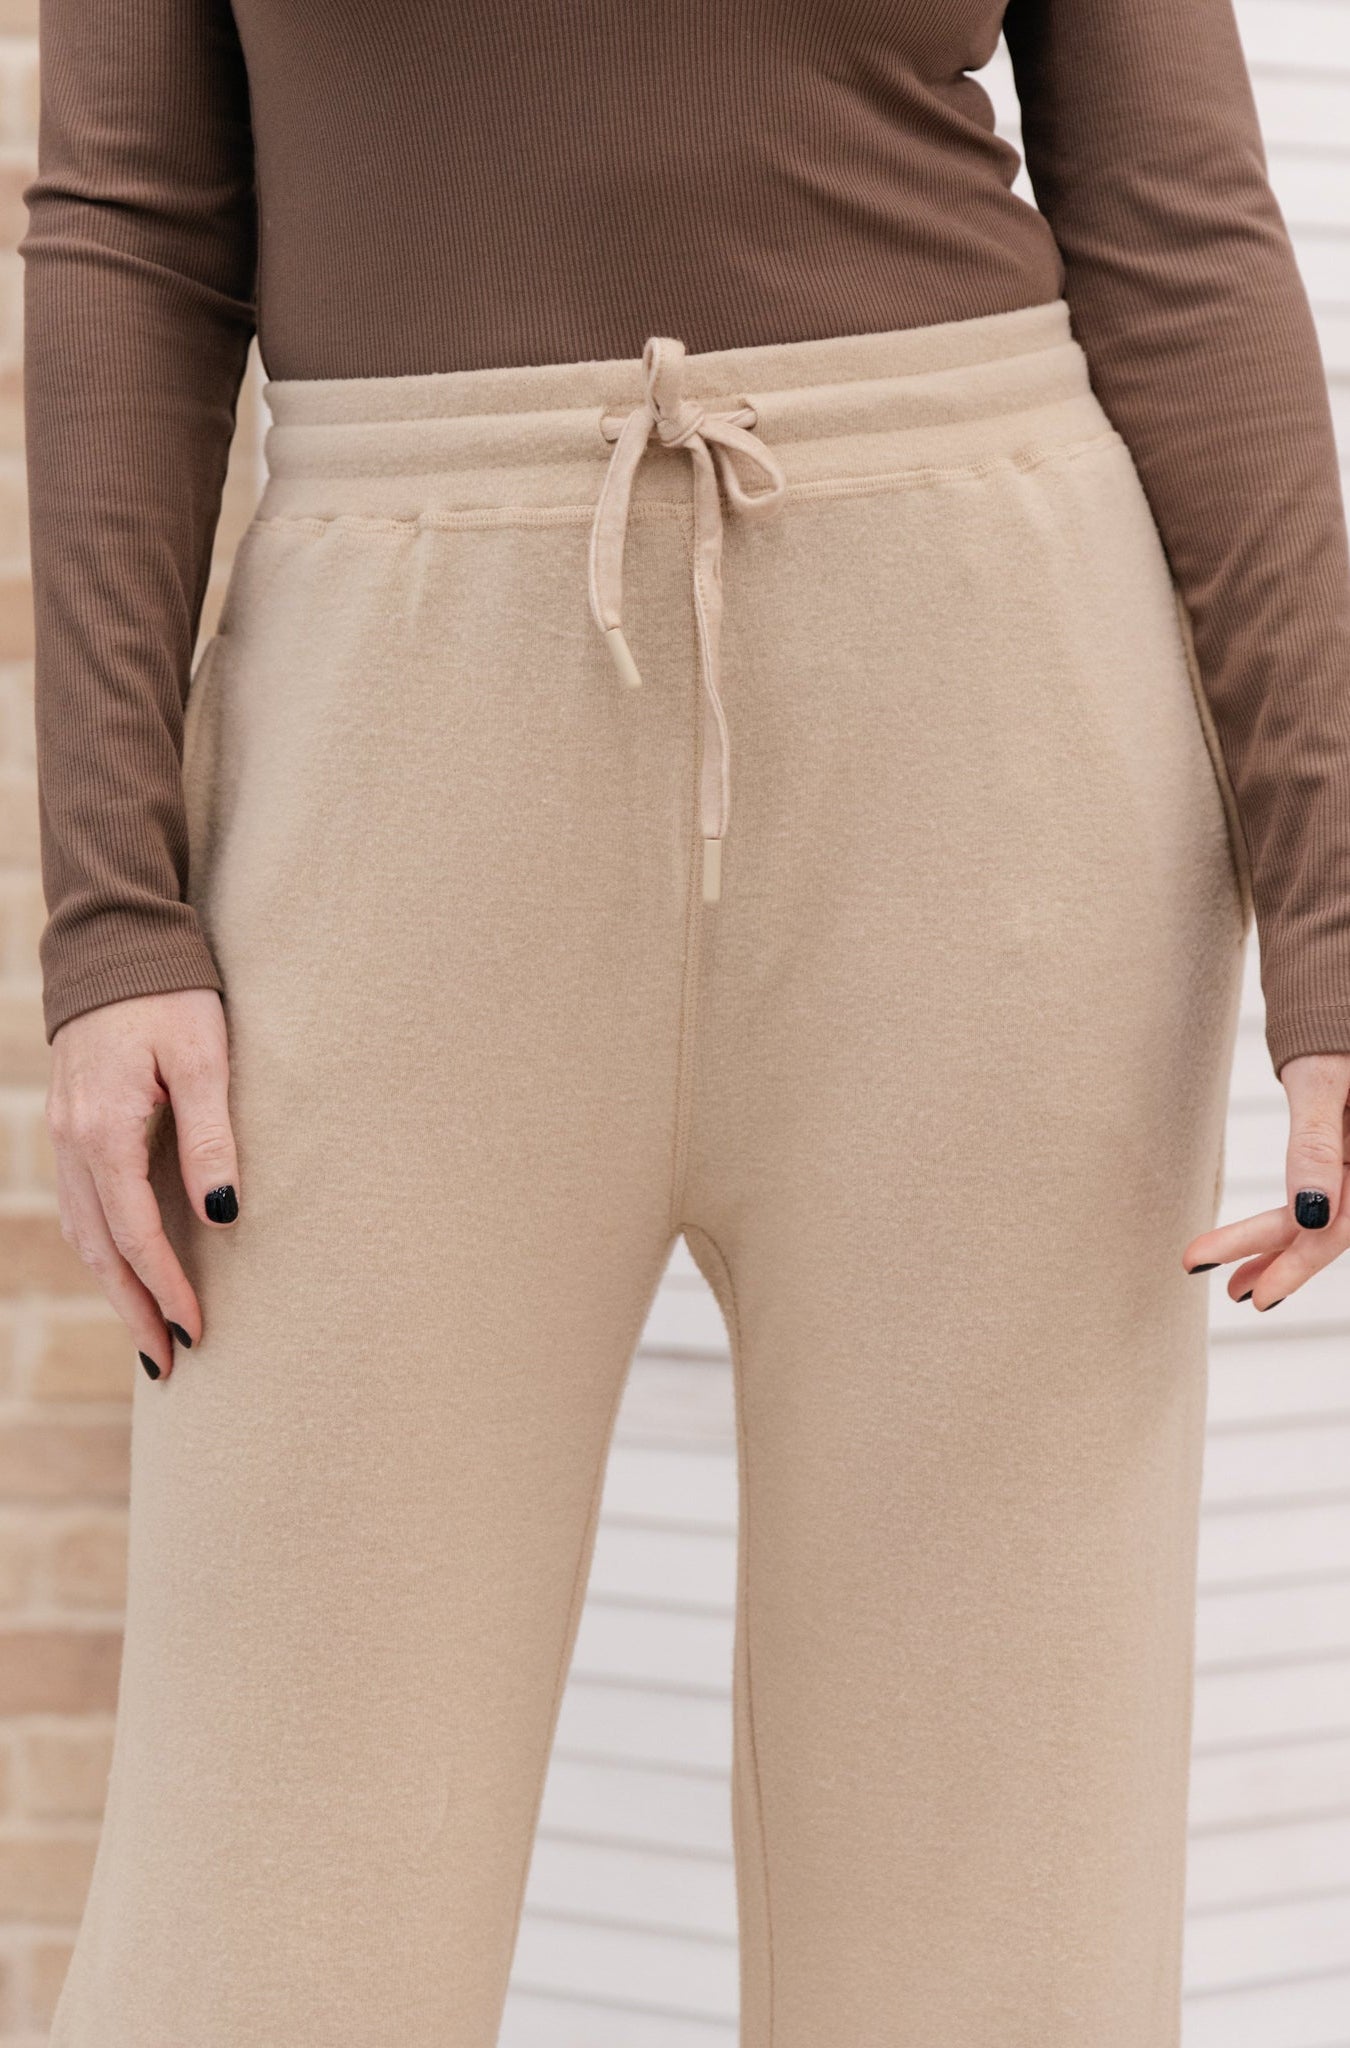 Wide Legged & Cozy Sweatpants in Sand Ave Shops